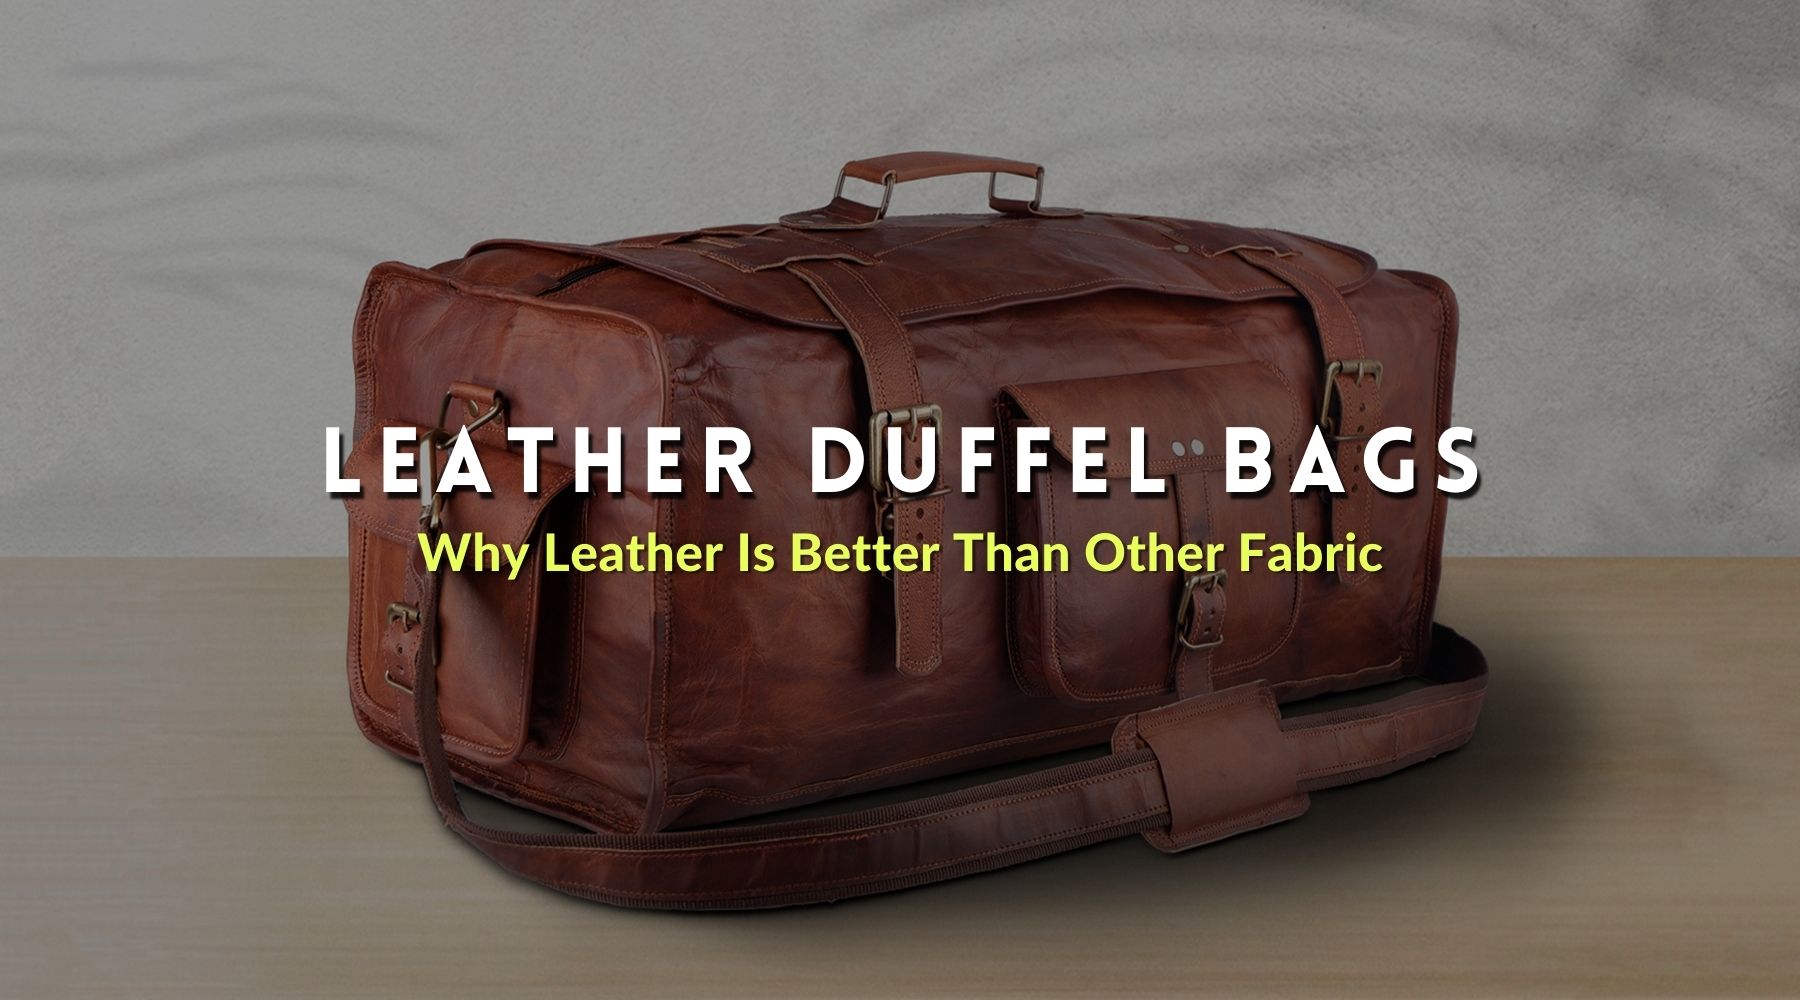 Why are leather-made duffel bags better than other fabric-made duffel bags?